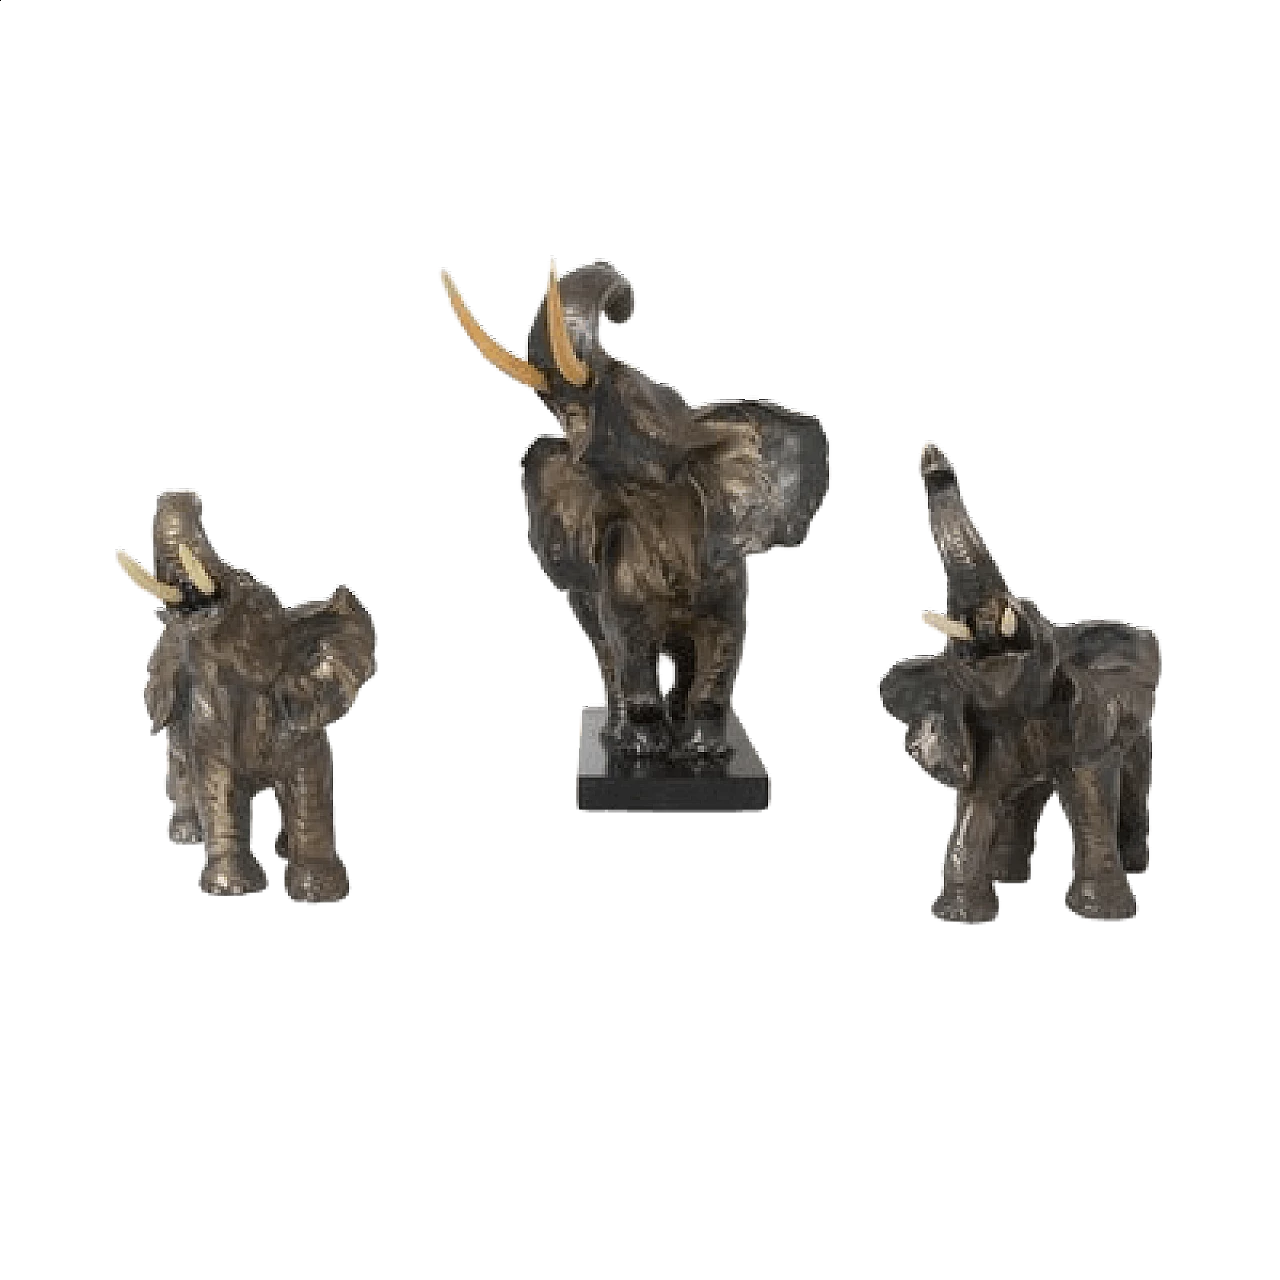 3 Statues of elephants in terracotta and silver-plated copper, 1950s 40